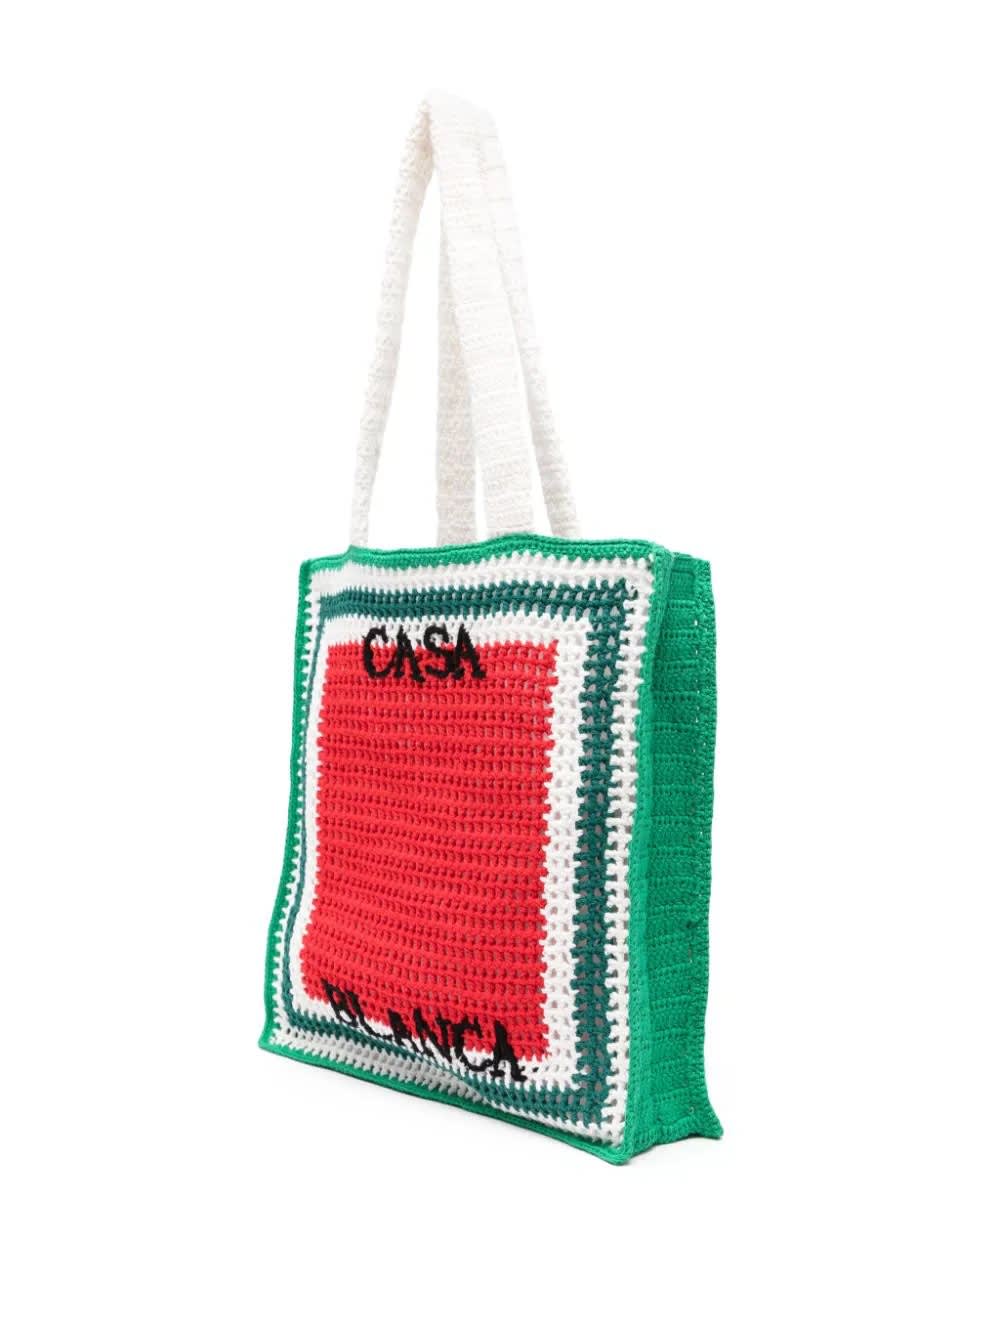 Shop Casablanca Crocheted Atlantis Tote Bag In Green, Red And White